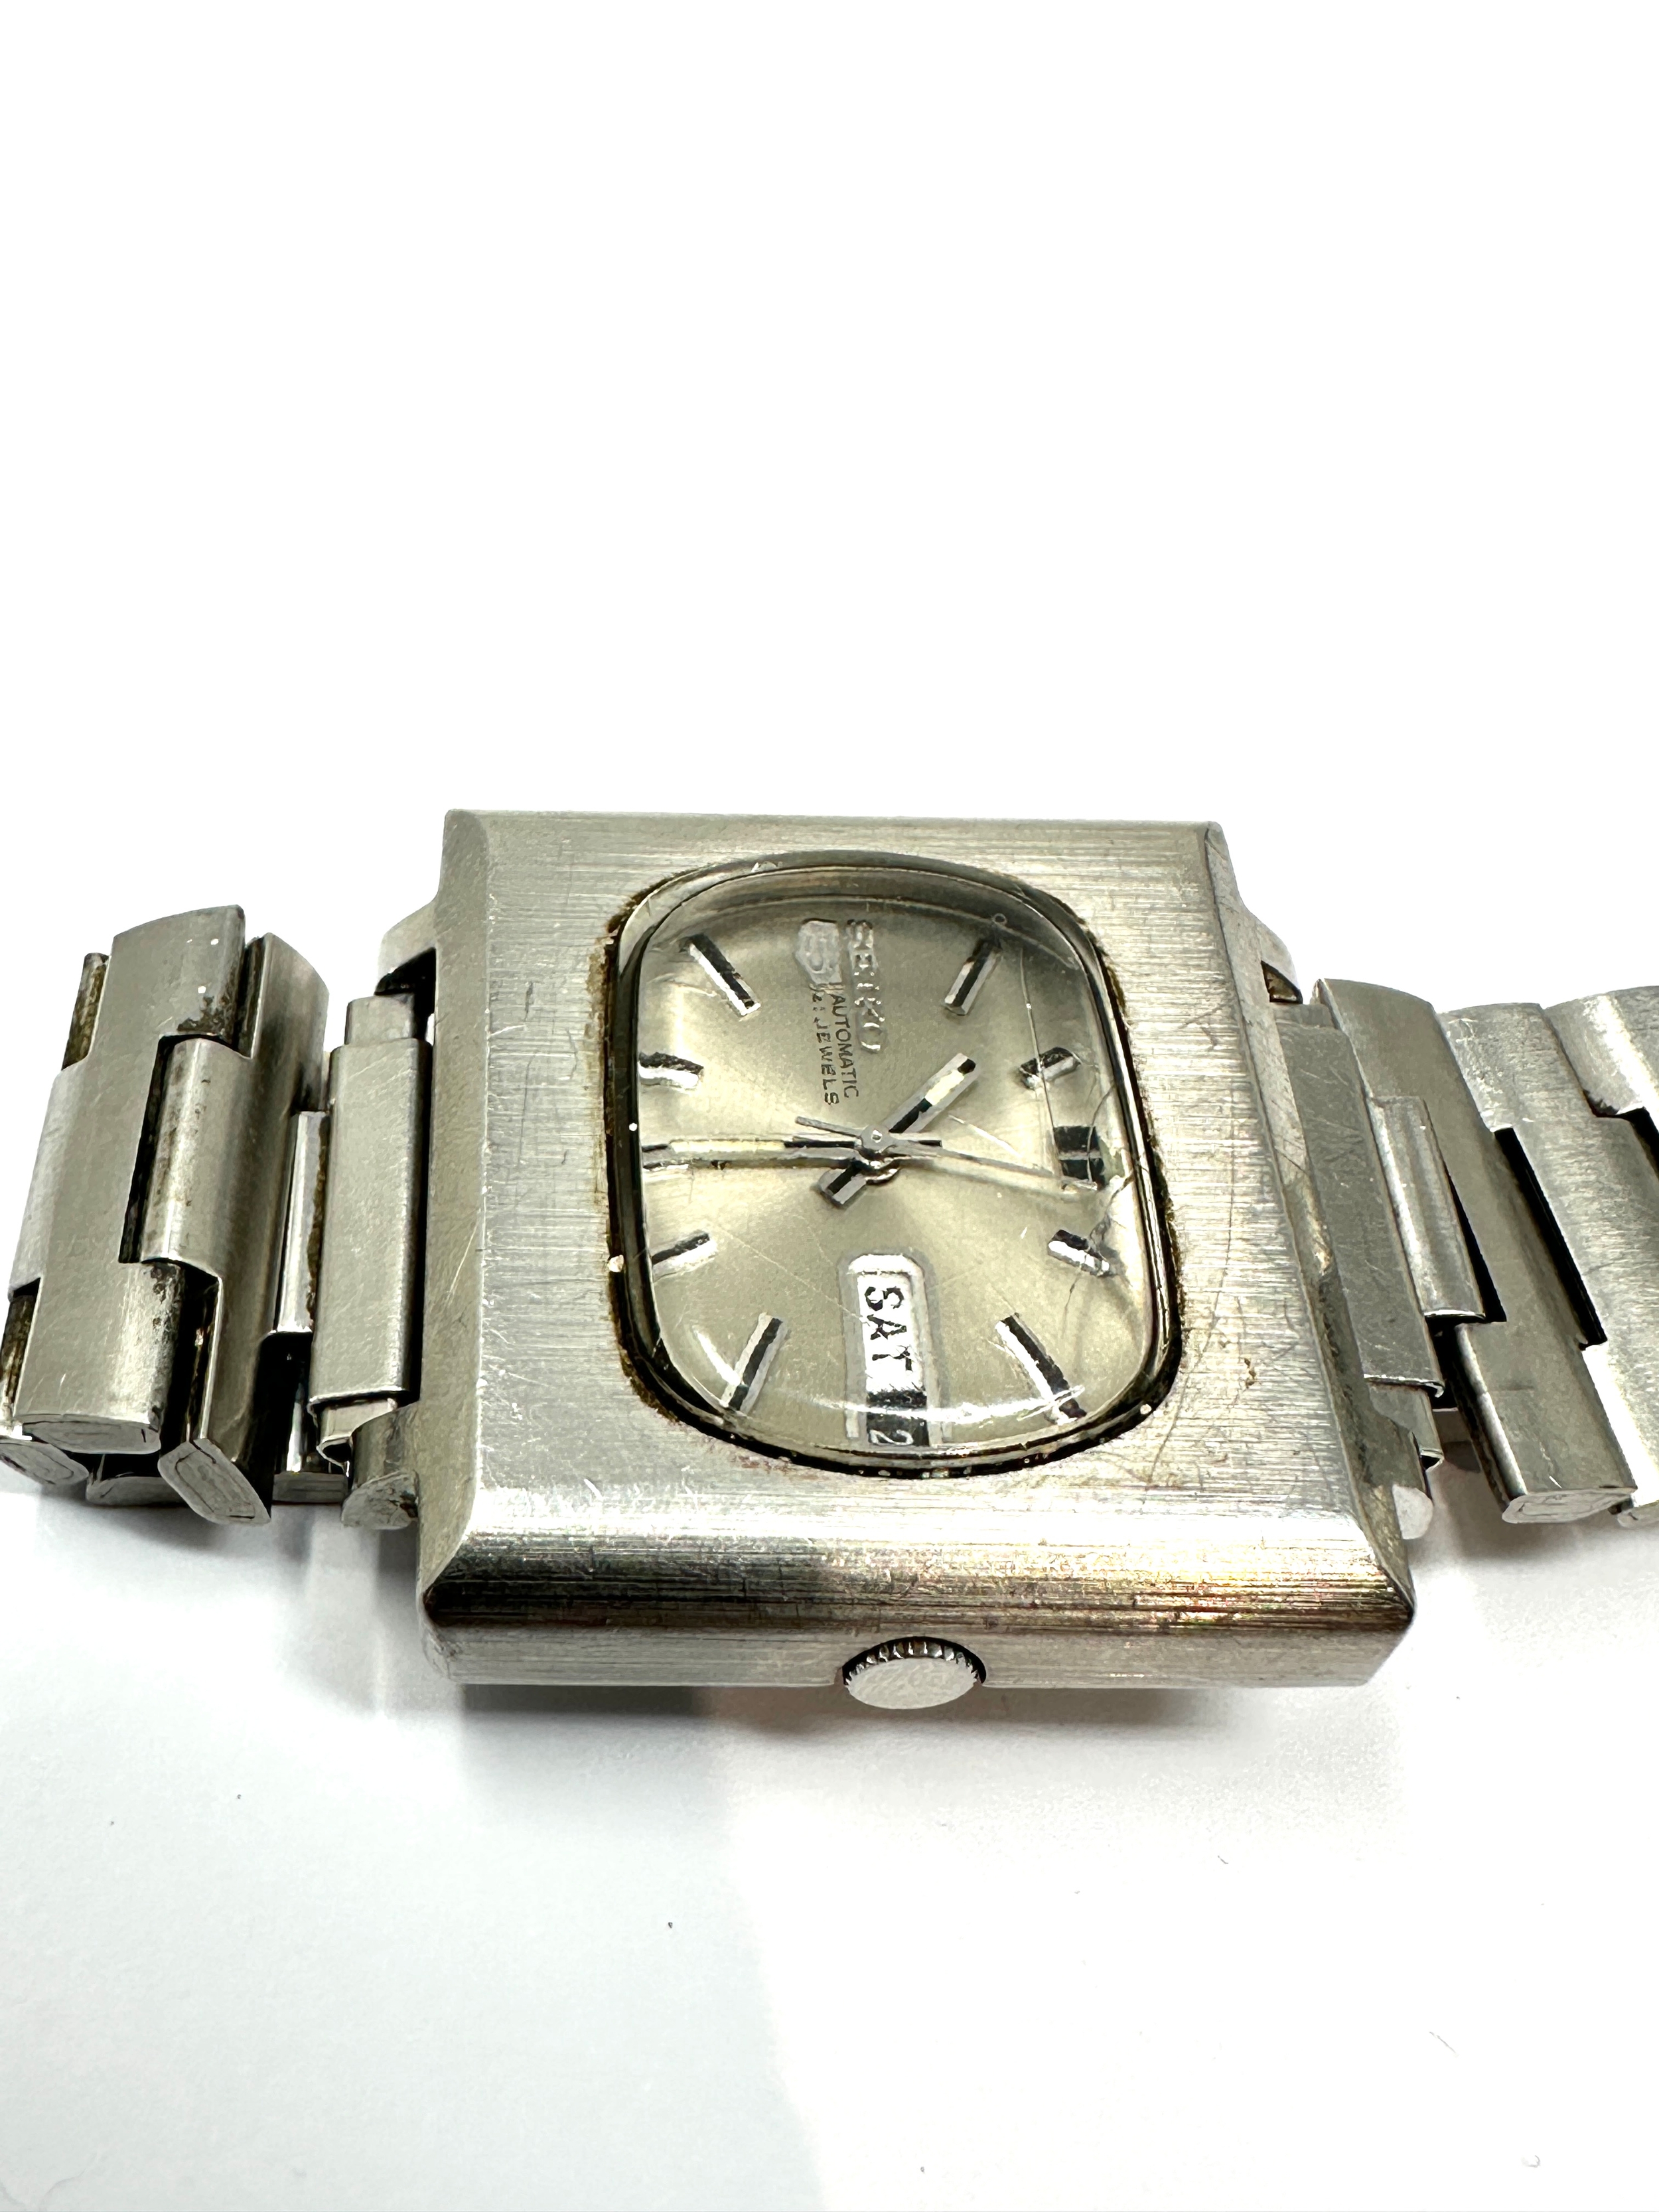 Vintage Seiko 5 TV Automatic 6119-5400- 21J Day/Date Wristwatch the watch is ticking crack to class - Image 2 of 4